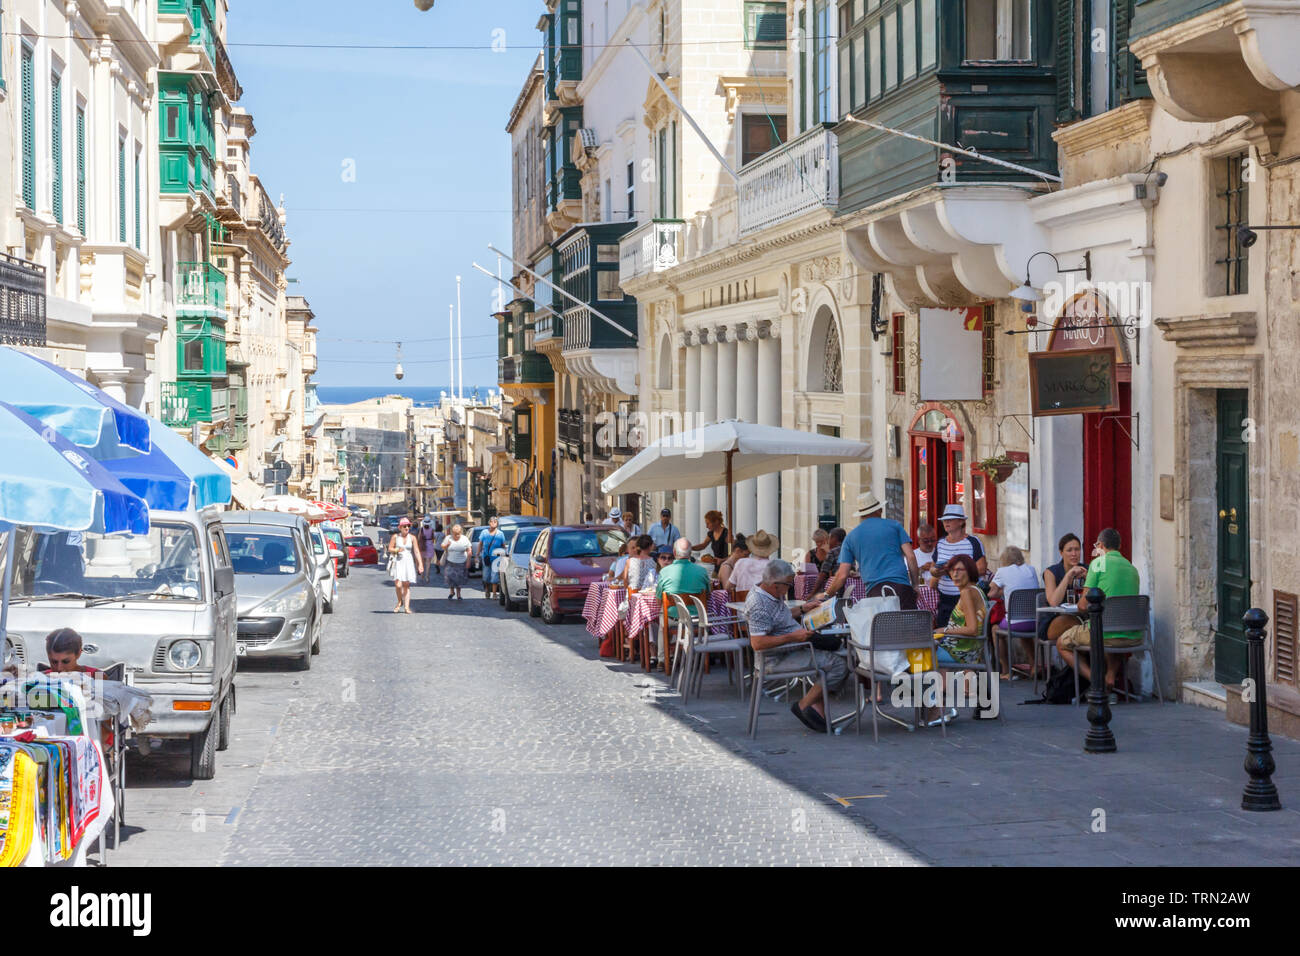 Valetta, Malta - September 13th 2015: Tourists sat outside on the main street. The city is a popular port with cruise ships. Stock Photo